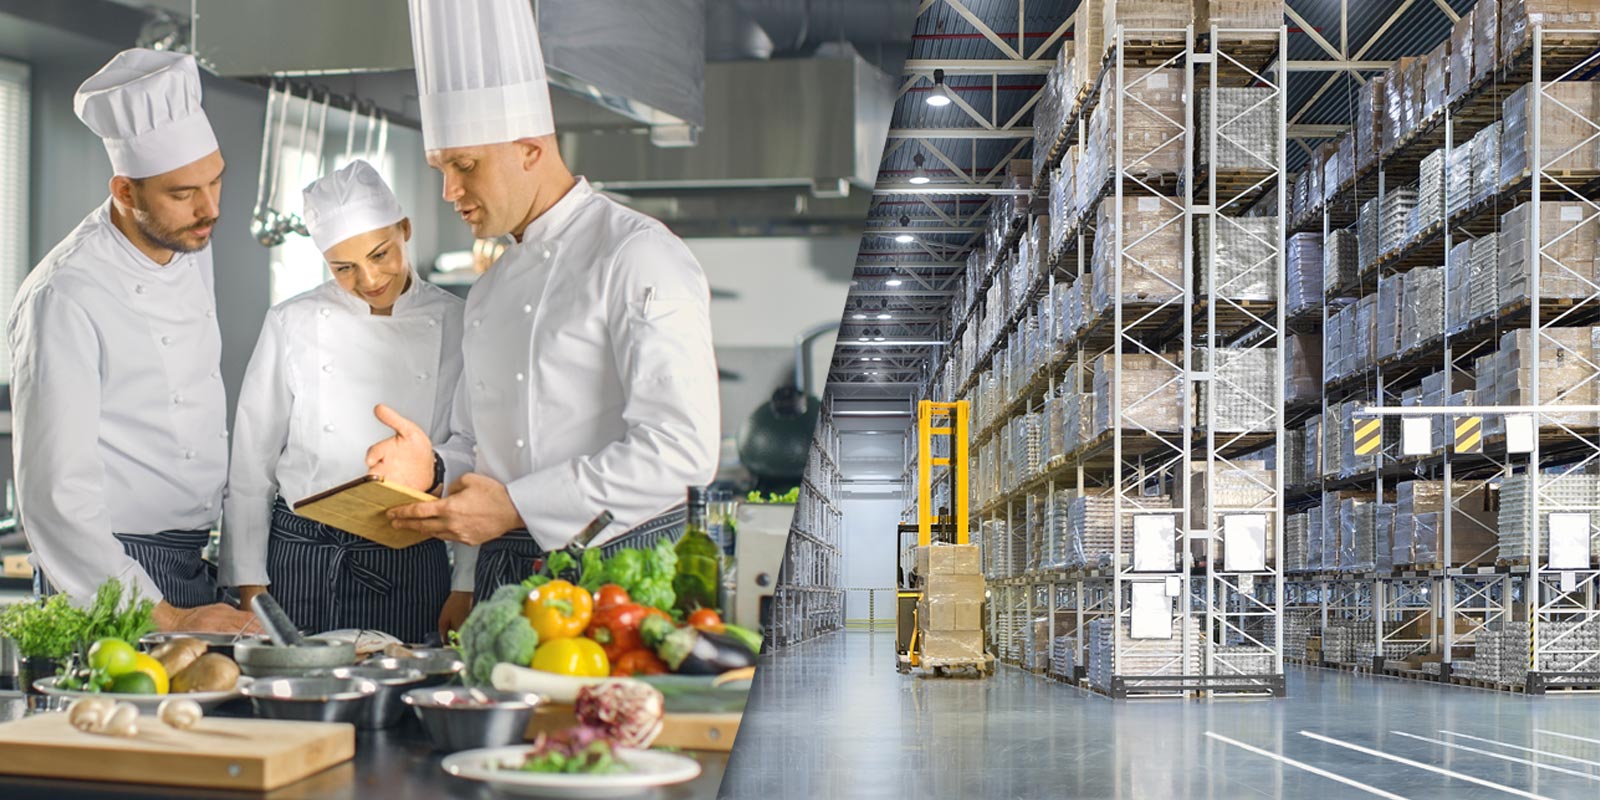 a chef working to prepare food and packaging are two functions of TKC Holdings Inc., the company that worked with DDI on selecting the right candidate for the job